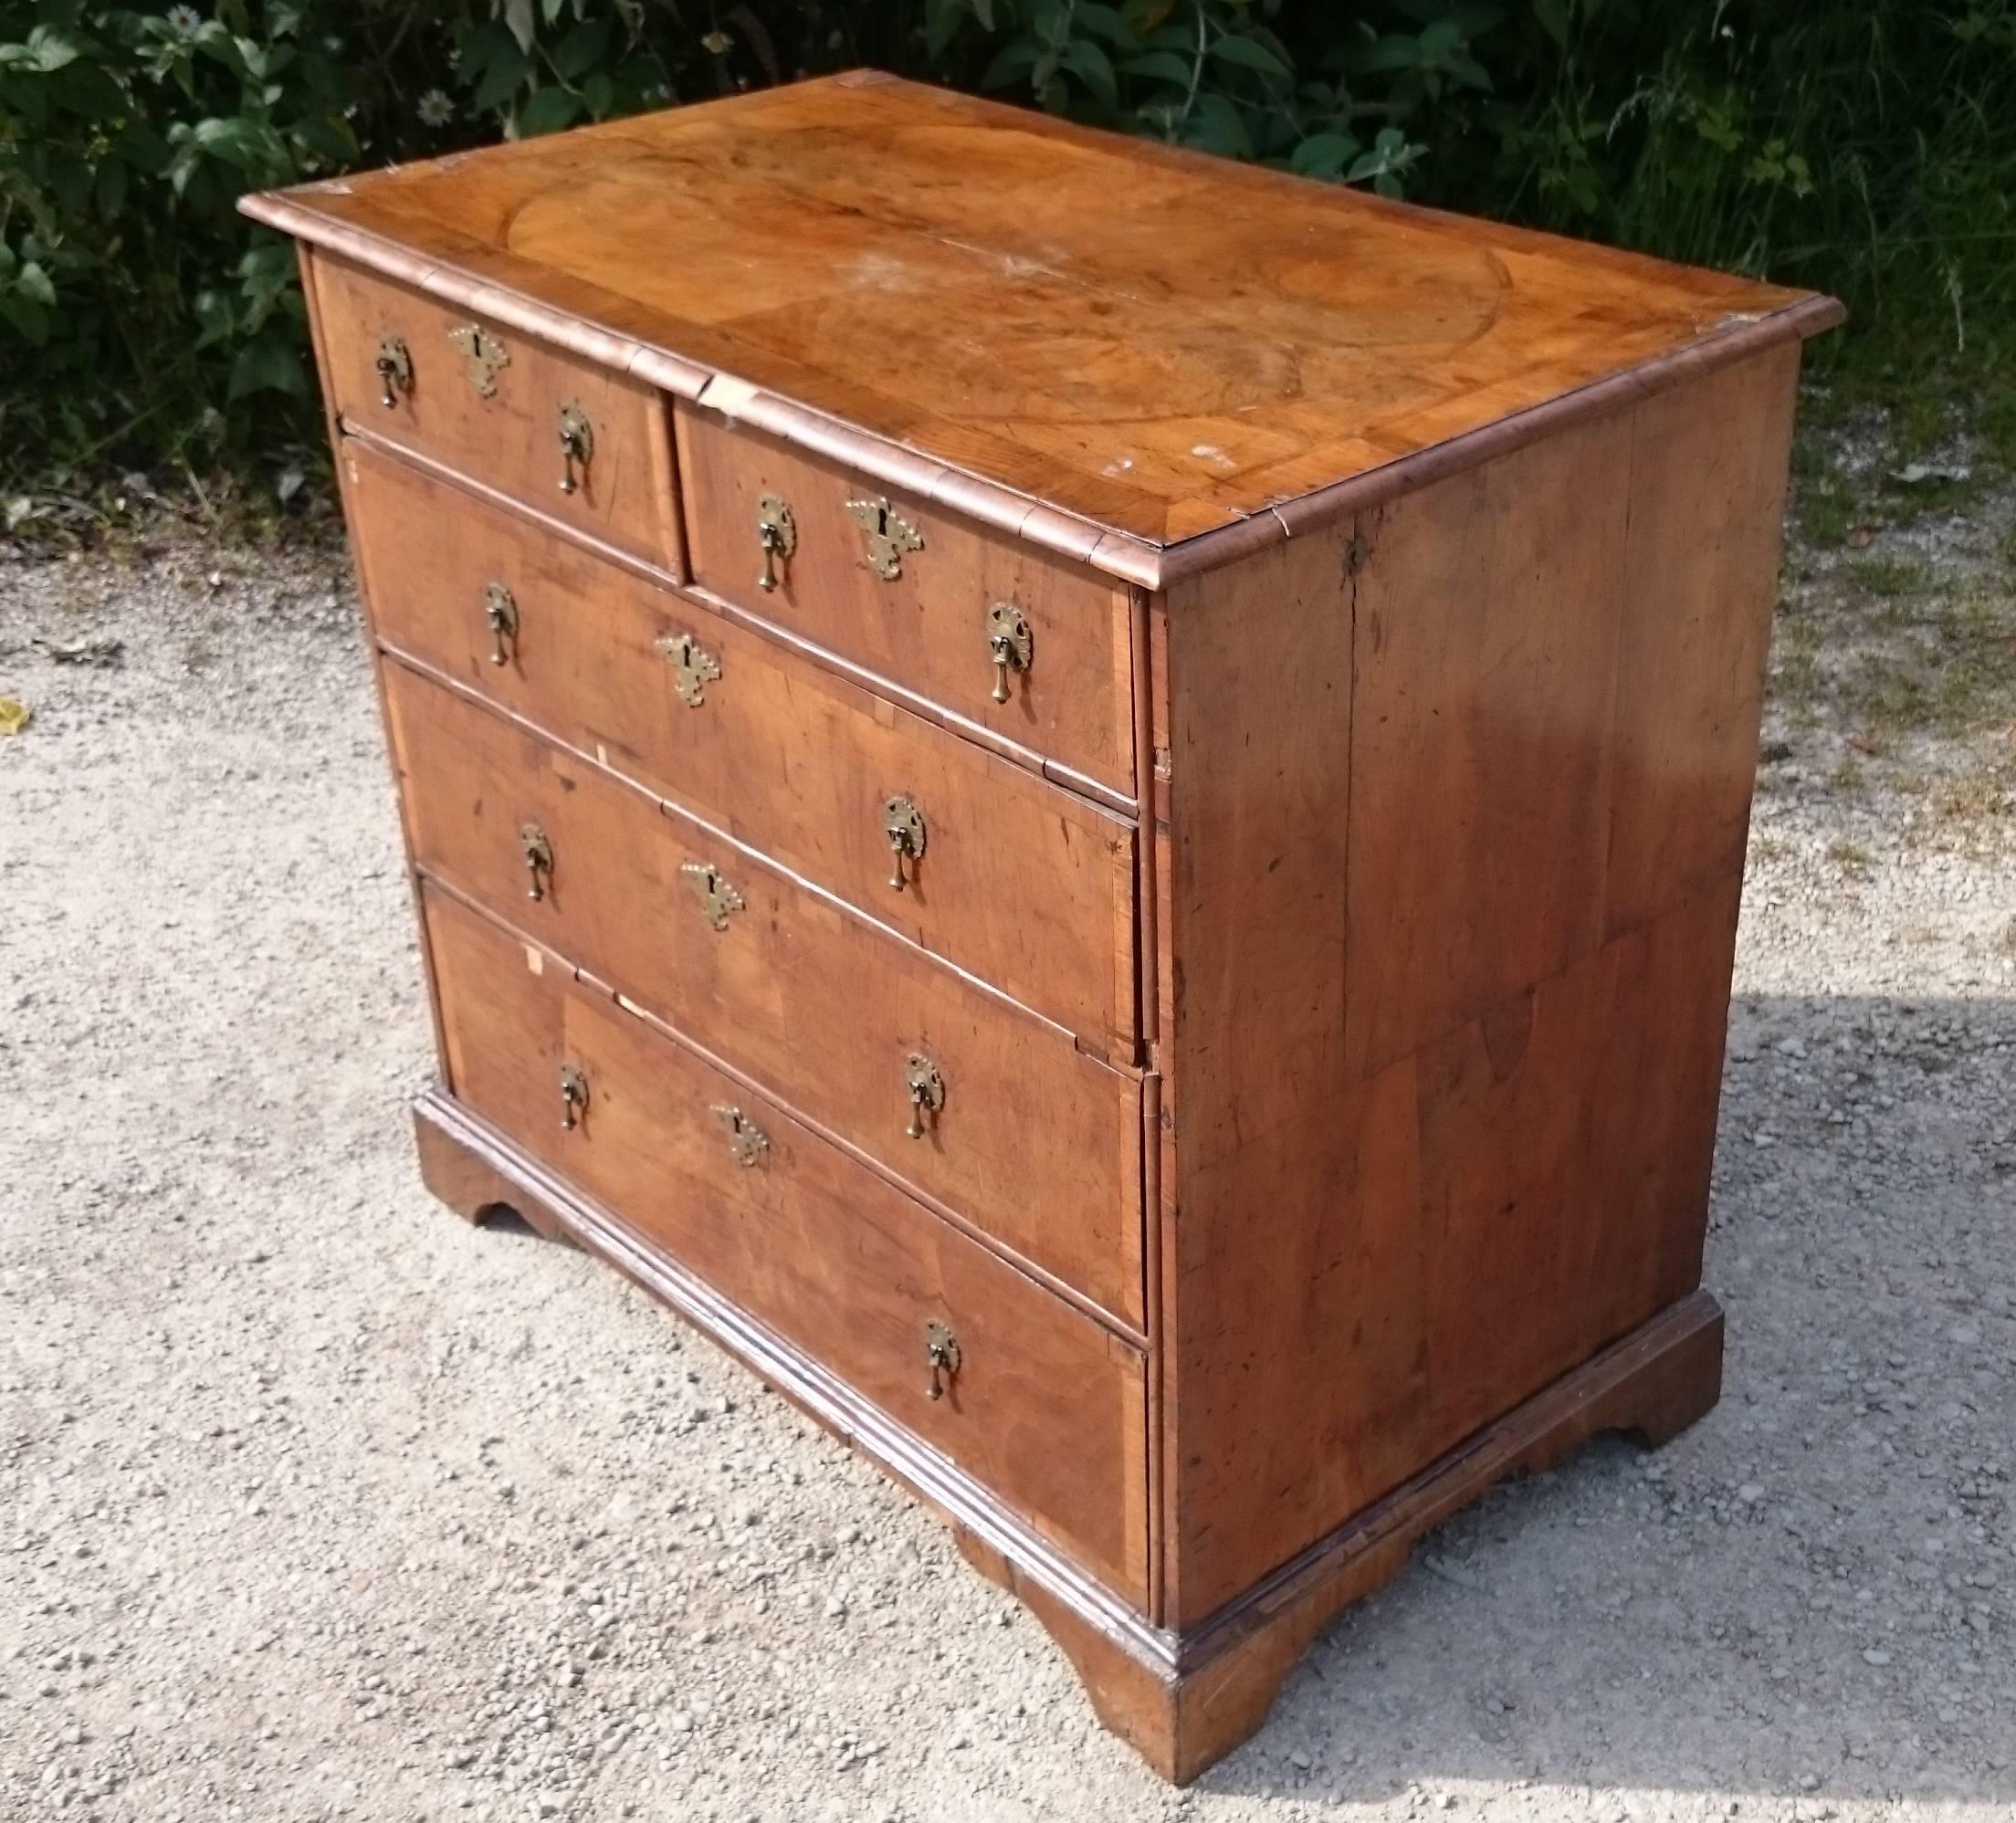 A very fine quality early 18th century walnut chest of drawers. This charming chest of drawers has wonderful quarter cut walnut sides and top comprising four bookmatched quarters to each section. The front and top also have walnut crossbanding and